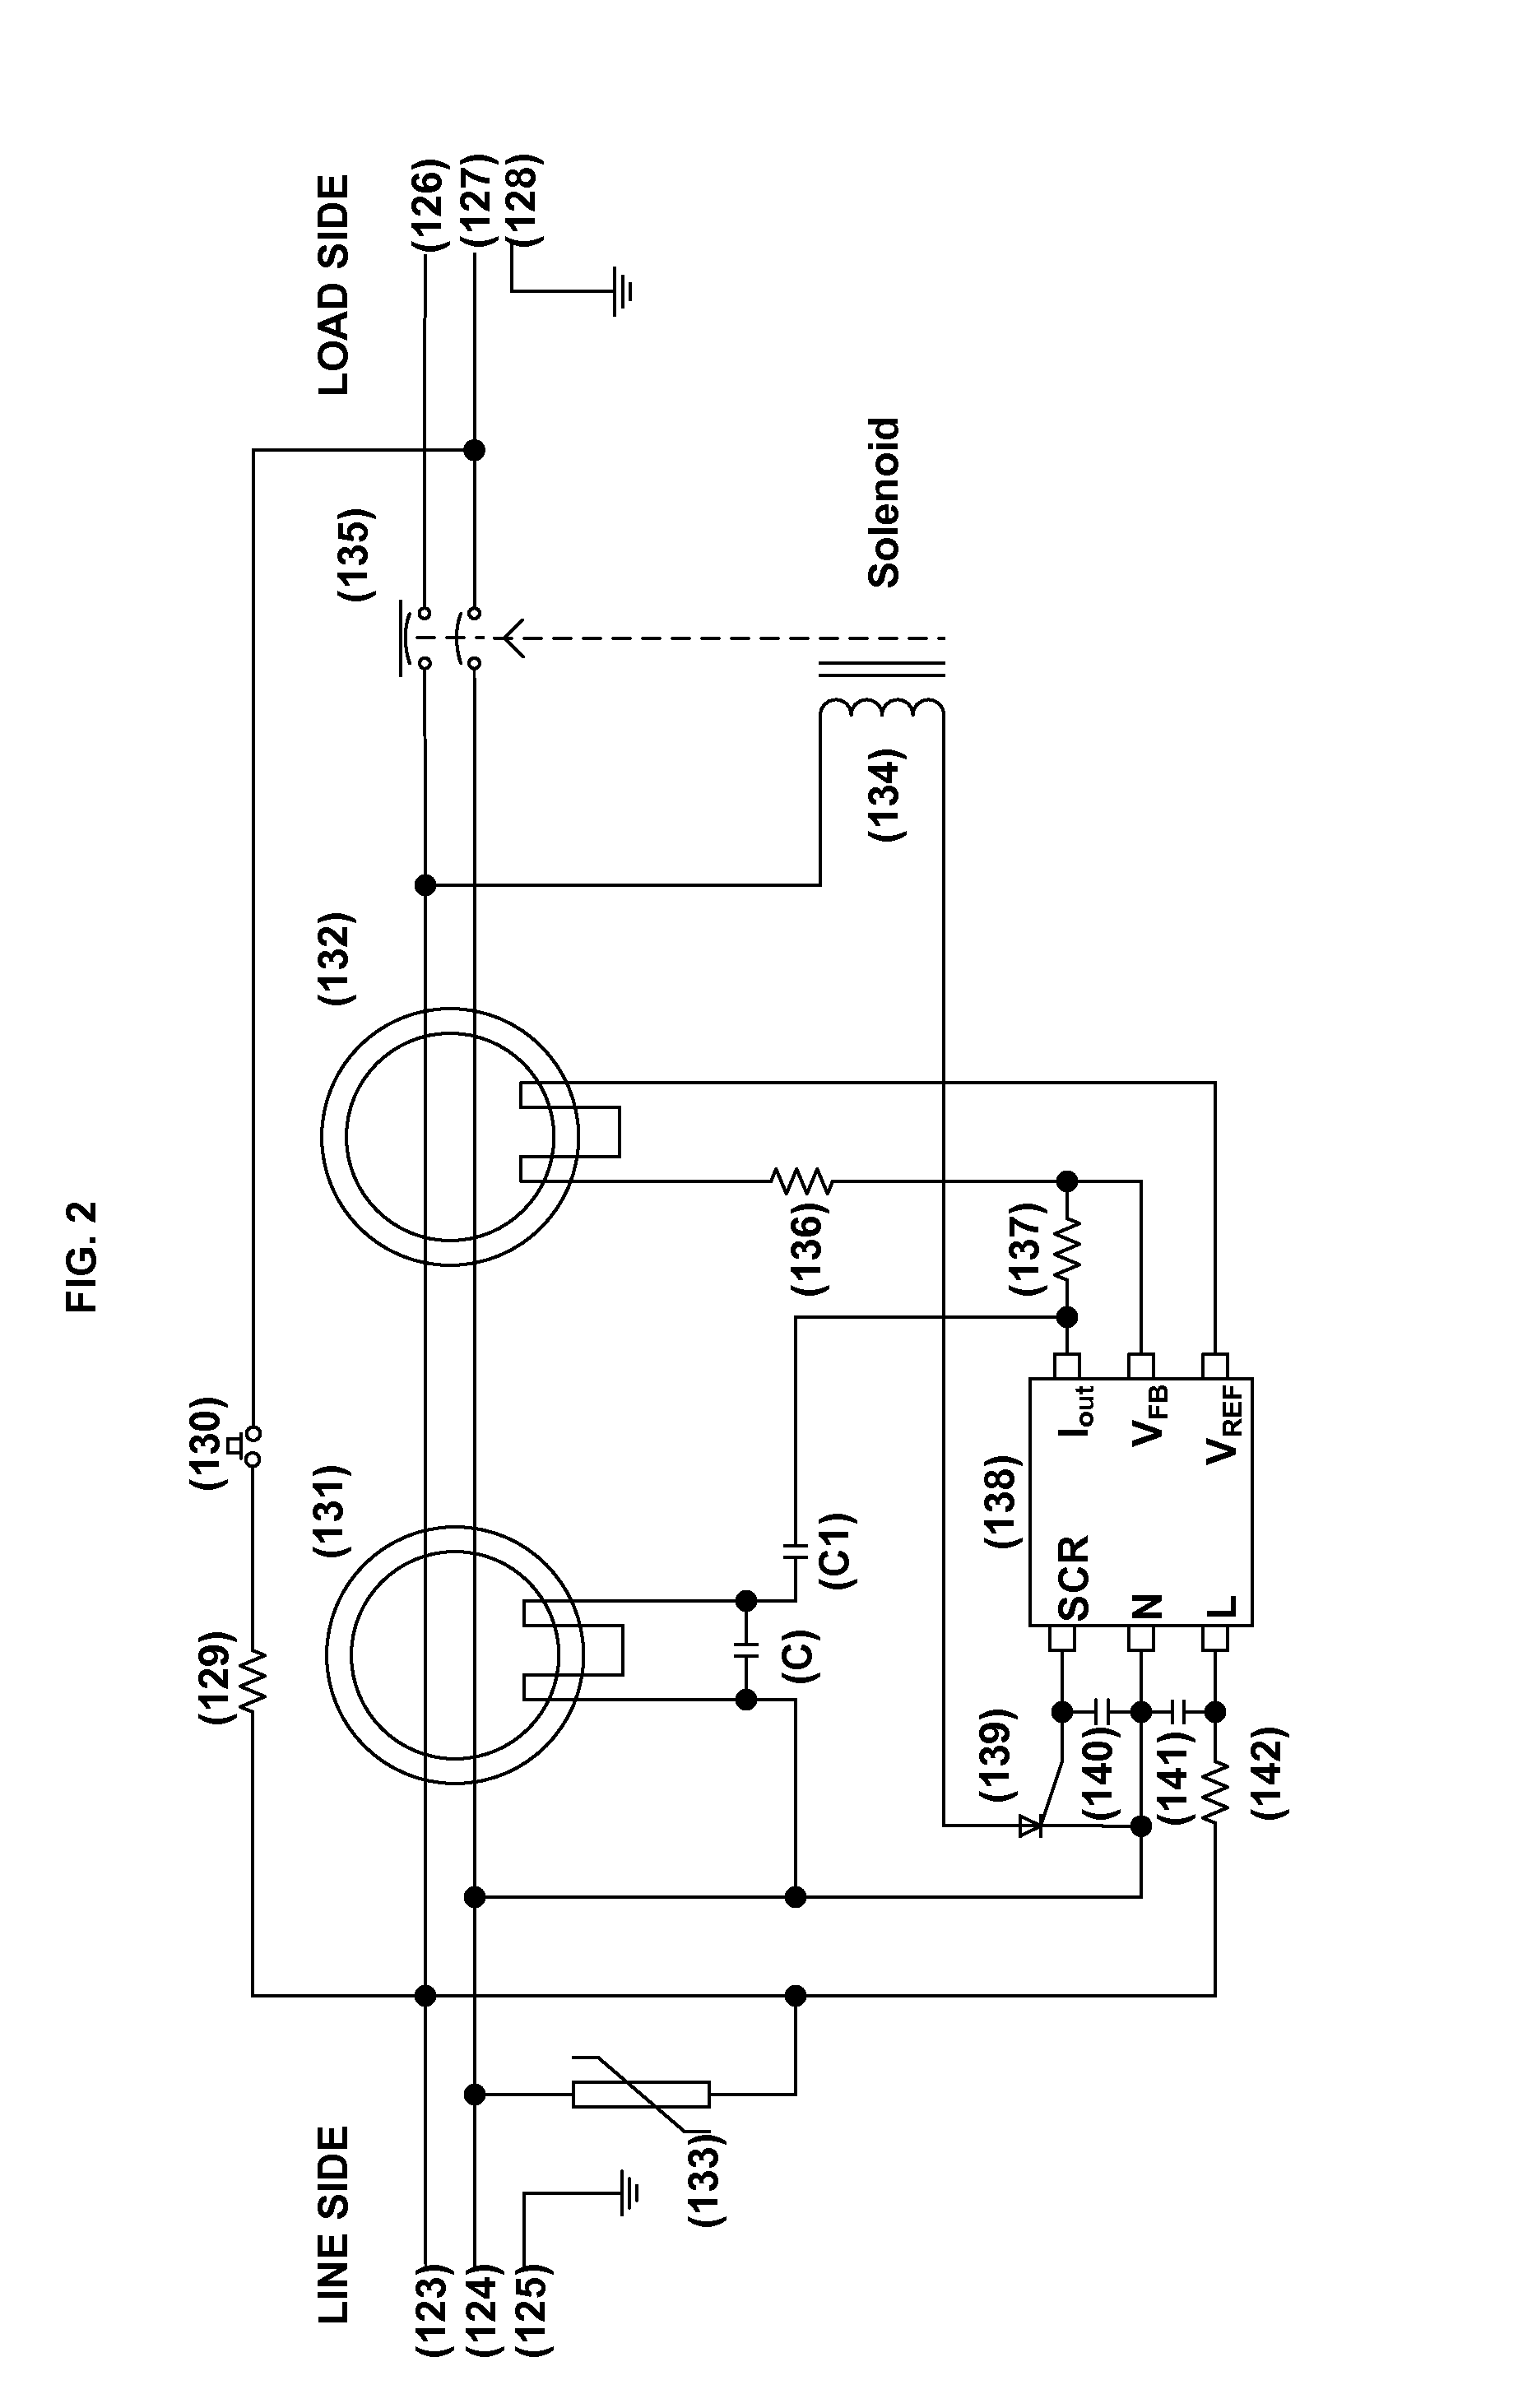 Apparatus, System And Method For Total Protection From Electrical Faults